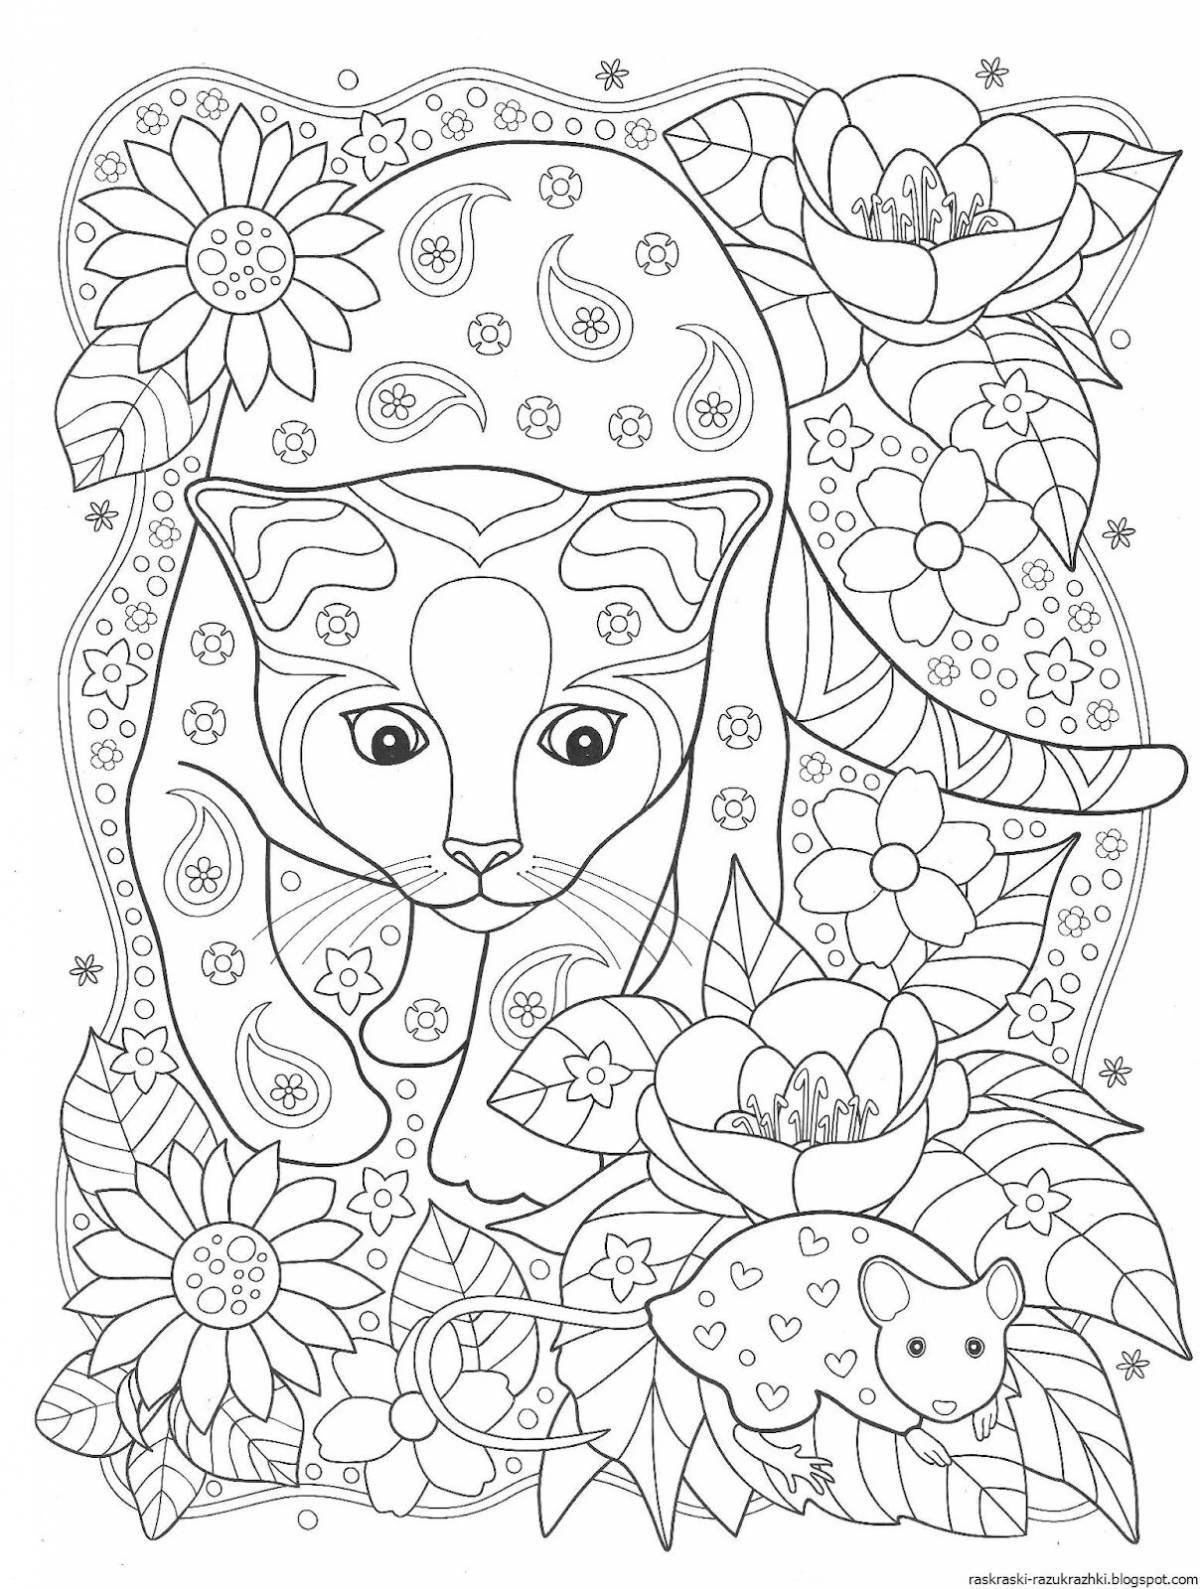 Cute antistress animal coloring book for girls